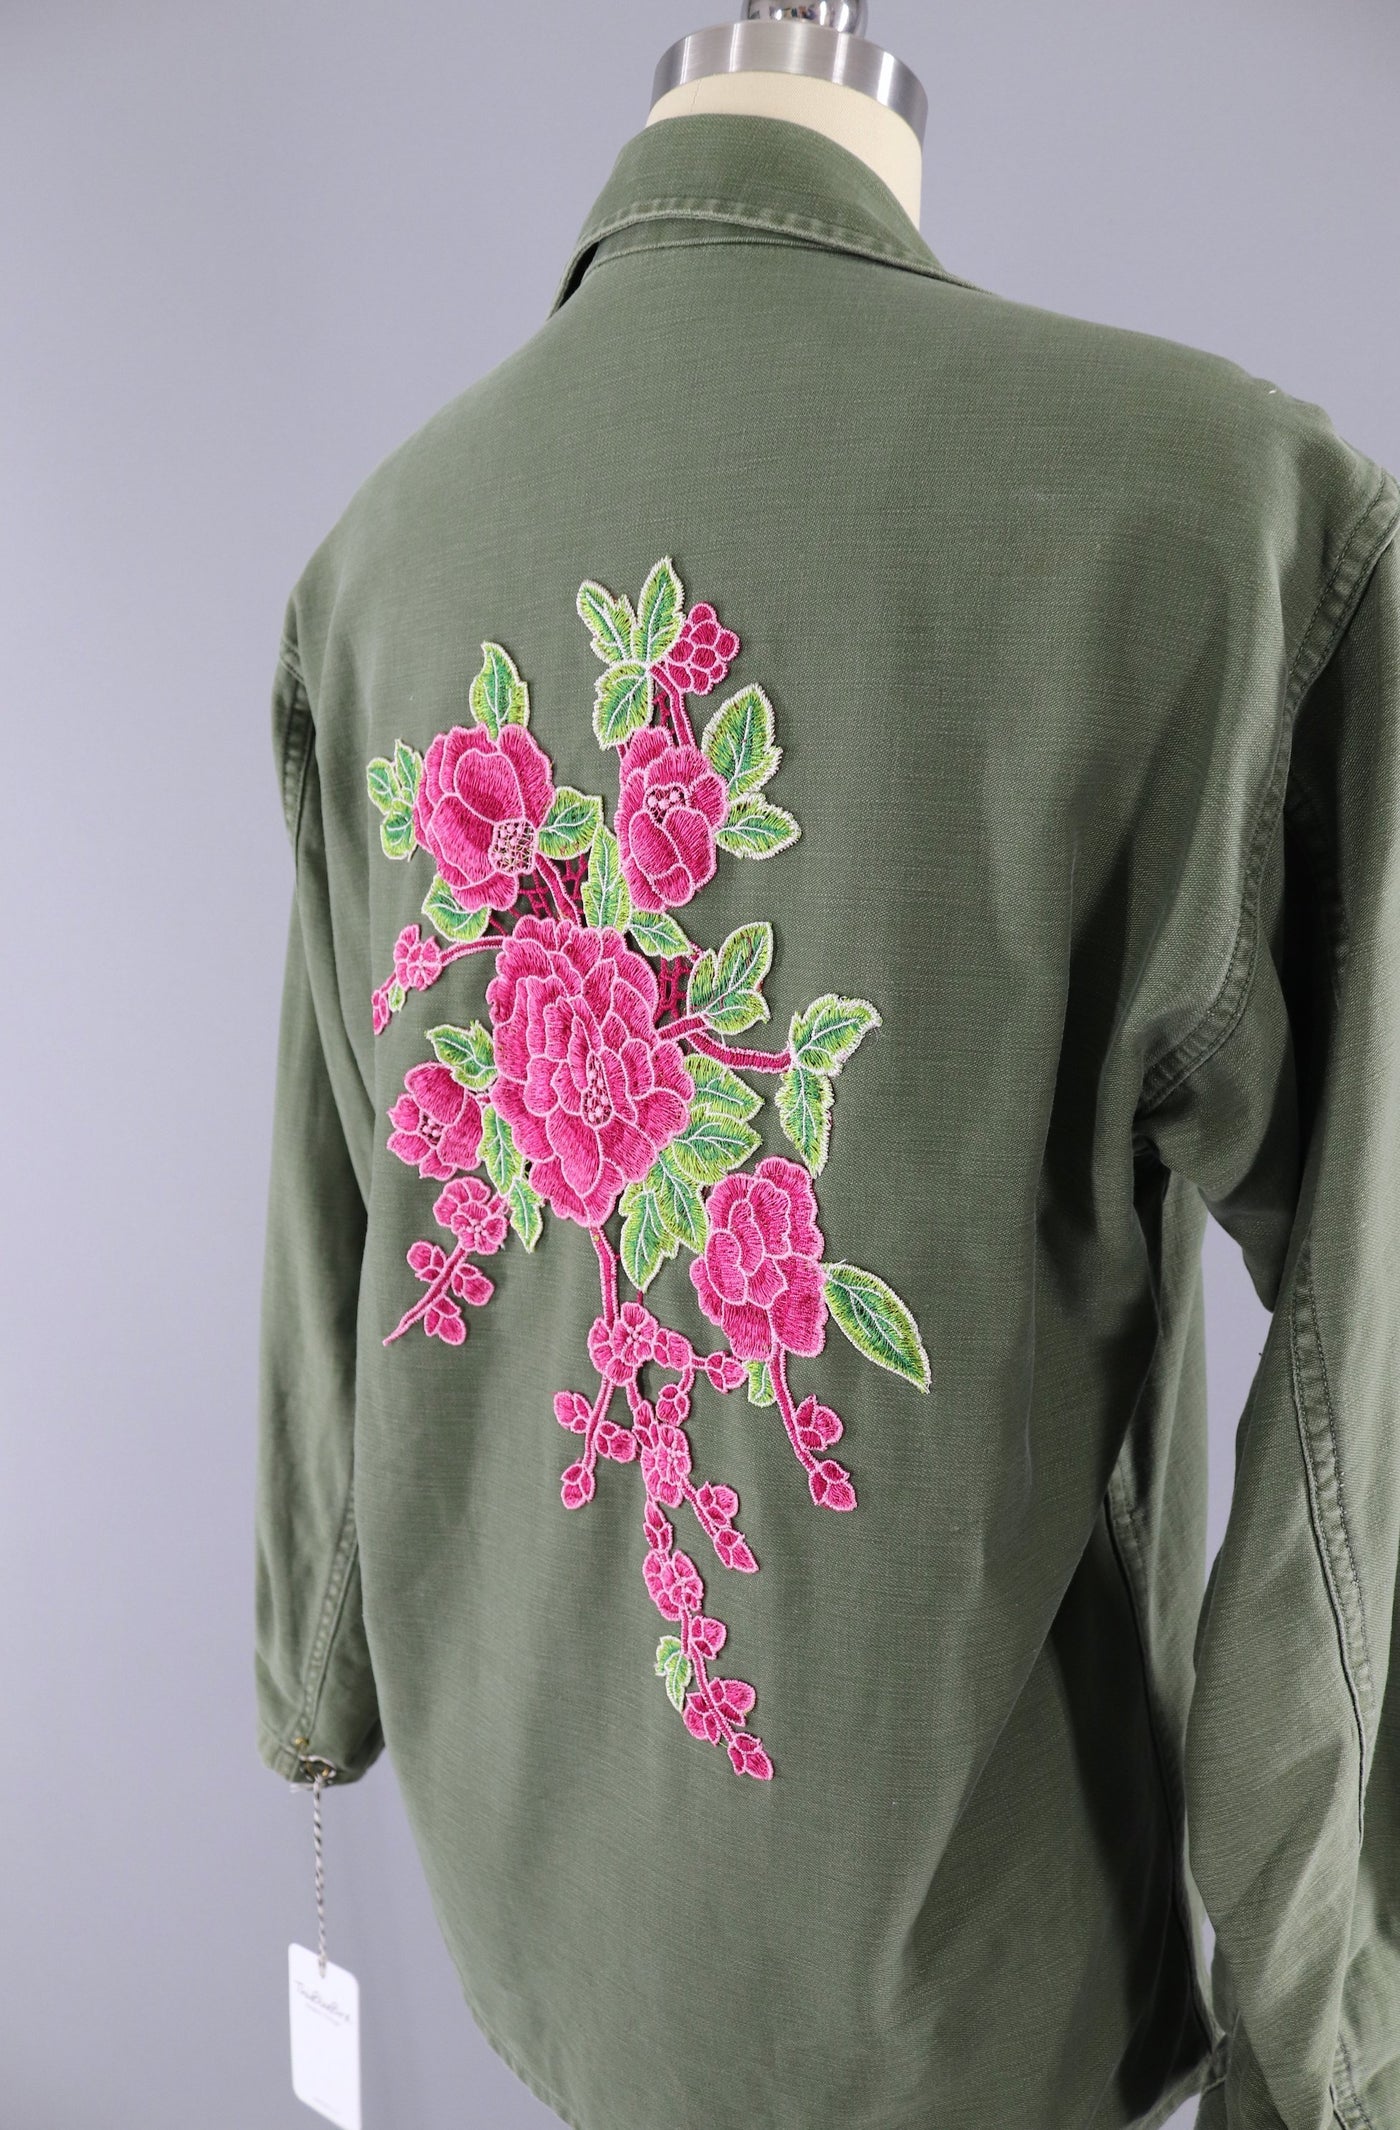 Vintage 1960s - 1970s Embroidered US Army Shirt Jacket / Olive Army Green & Pink Floral Embroidery - ThisBlueBird